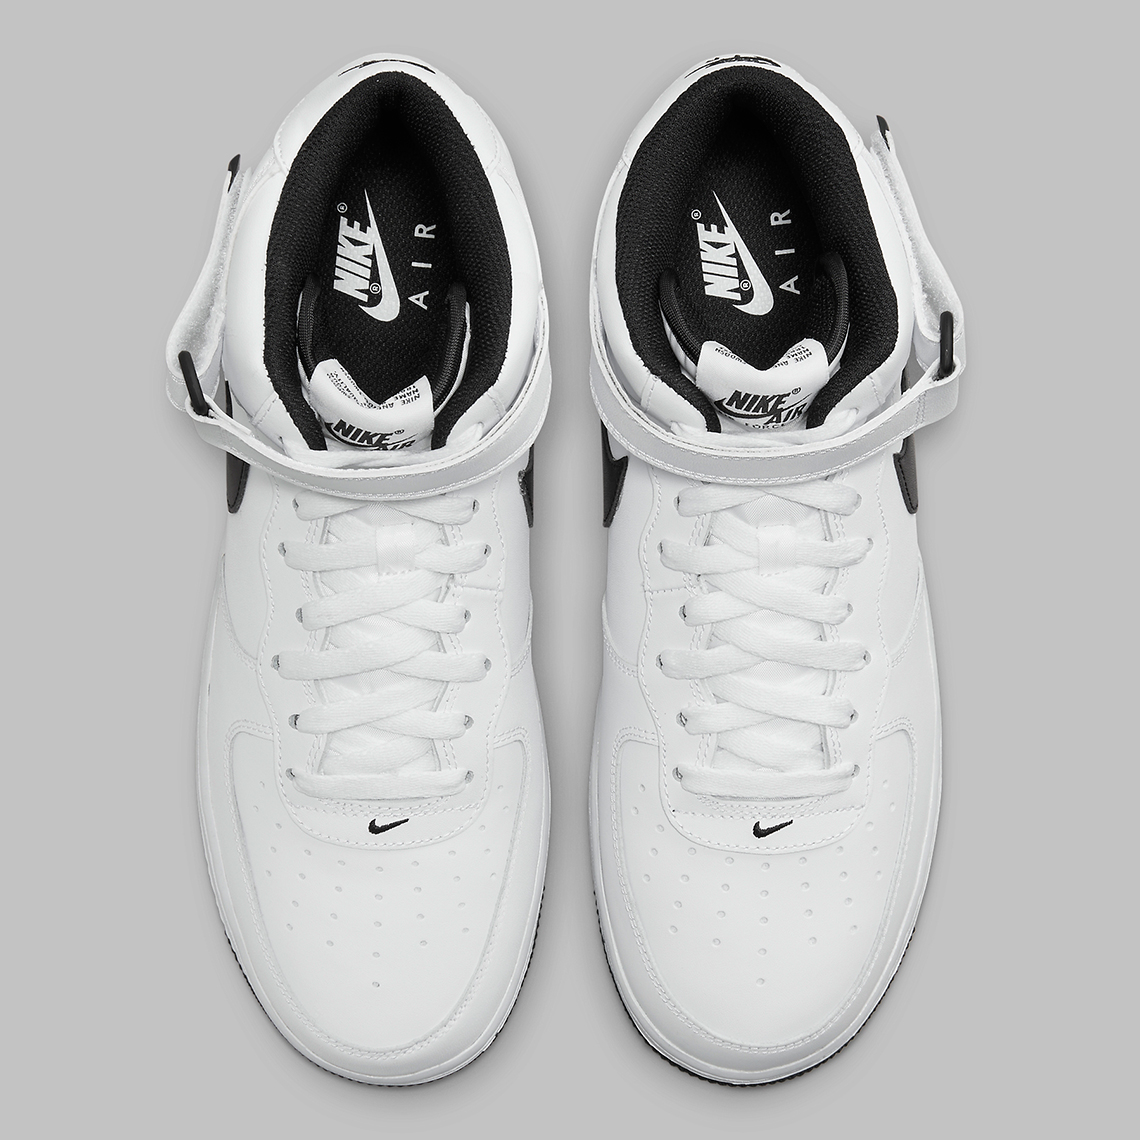 Nike Includes Kyrie Irving In The N7 Collection With Kyrie Low 5 Mid White Black Dv0806 101 9